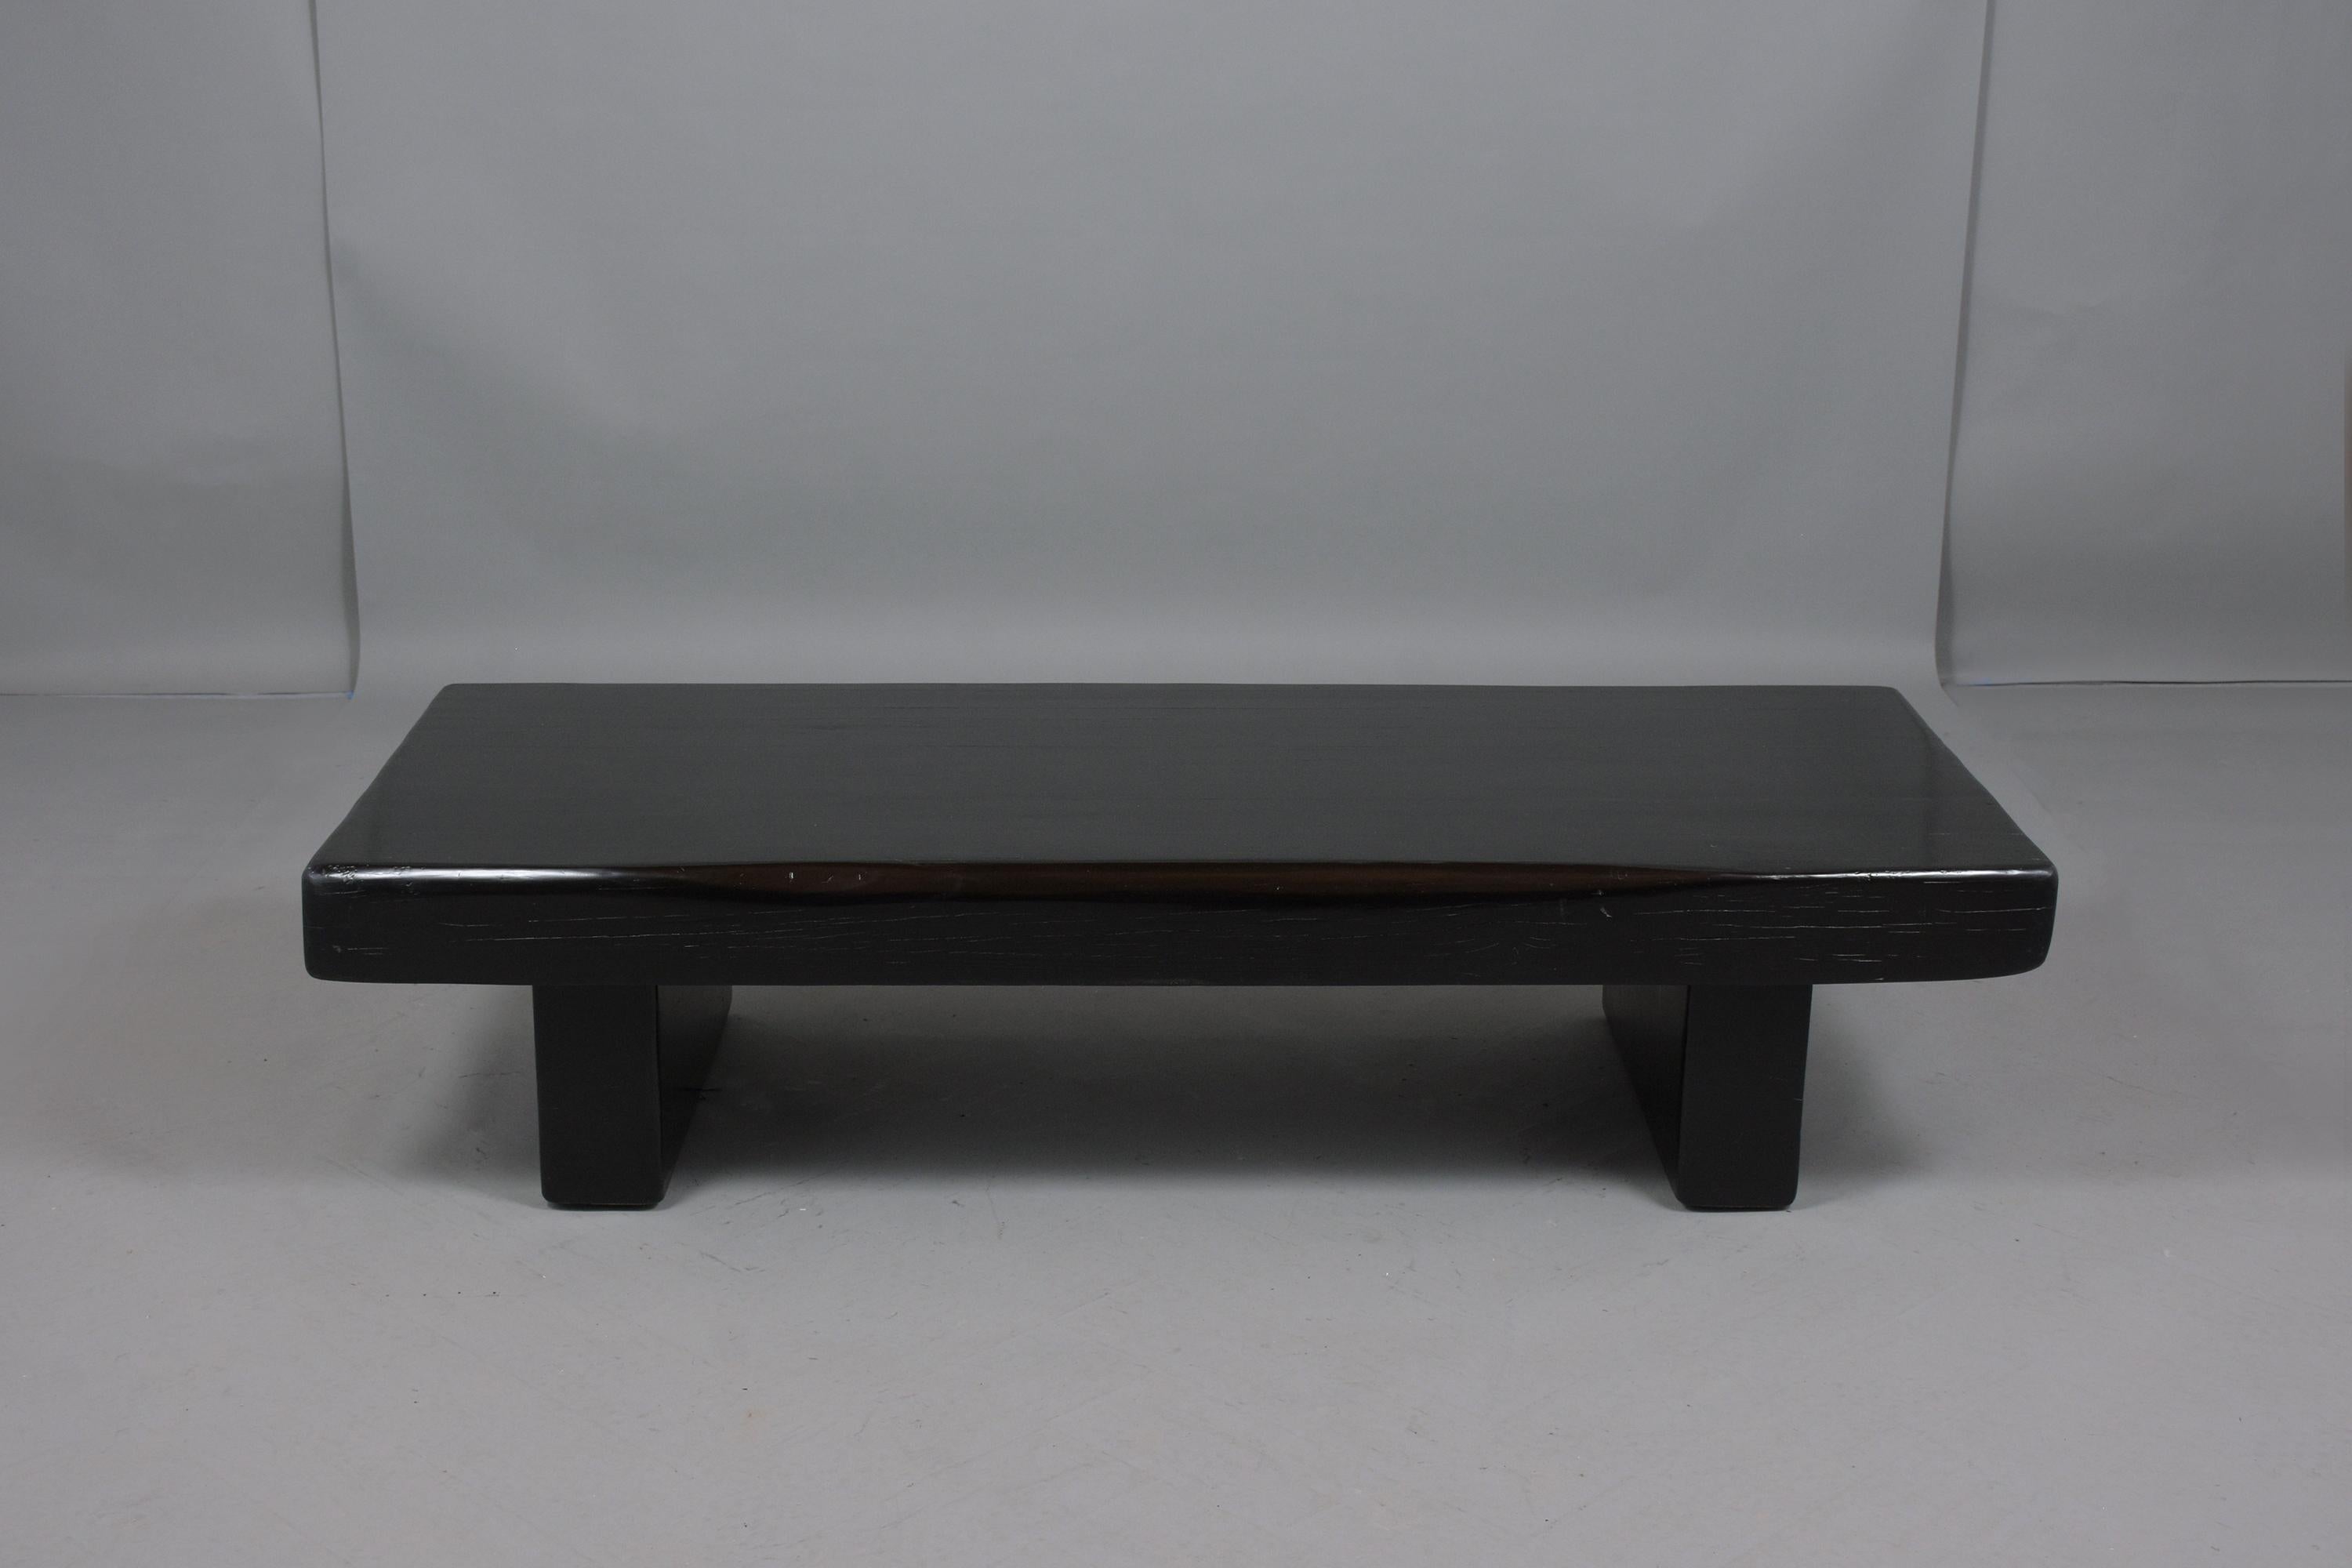 An excellent coffee table hand-crafted out of solid wood with a simple form design that sits on sturdy block pedestal legs. This fabulous piece has newly finished in deep black color with lacquered finish a perfect and will make the perfect addition